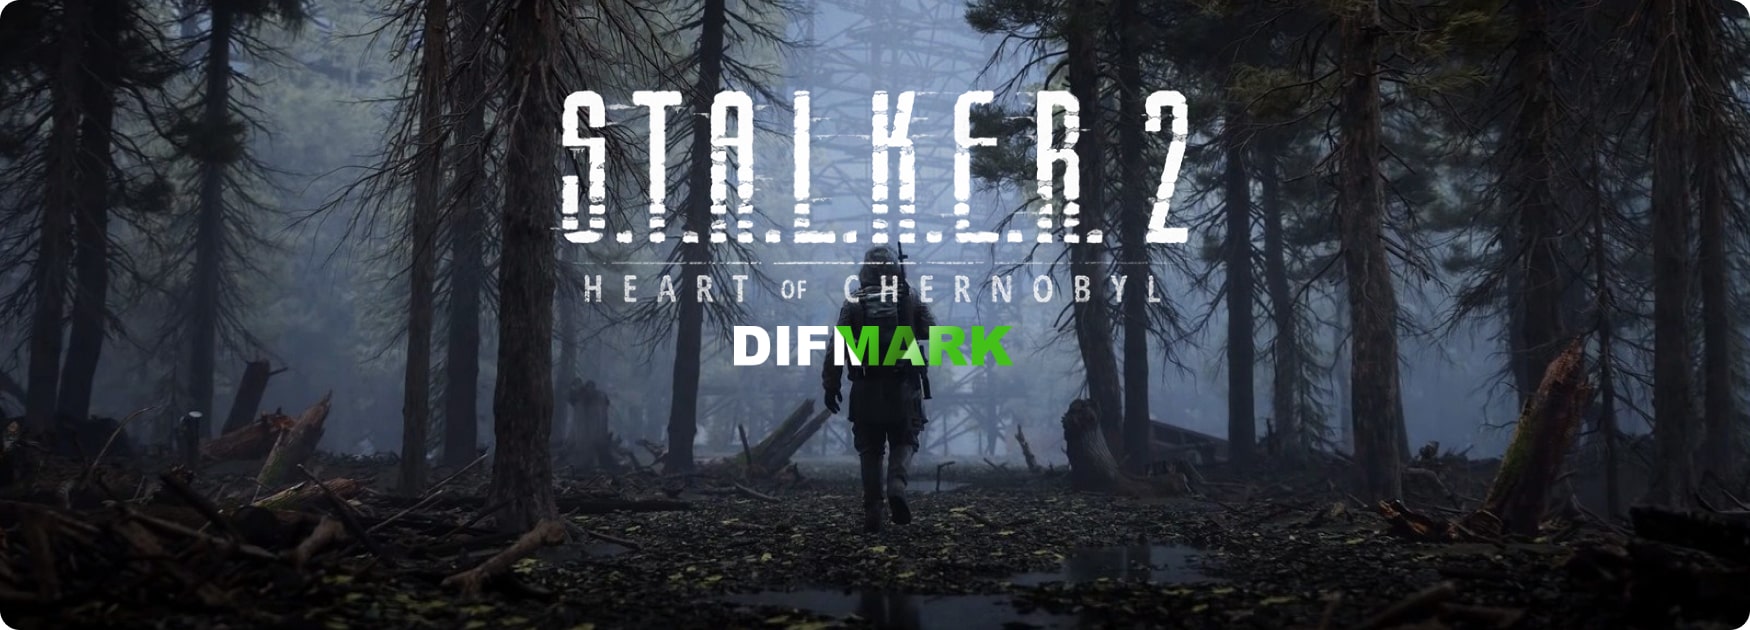 Details of S.T.A.L.K.E.R. 2: Heart of Chernobyl